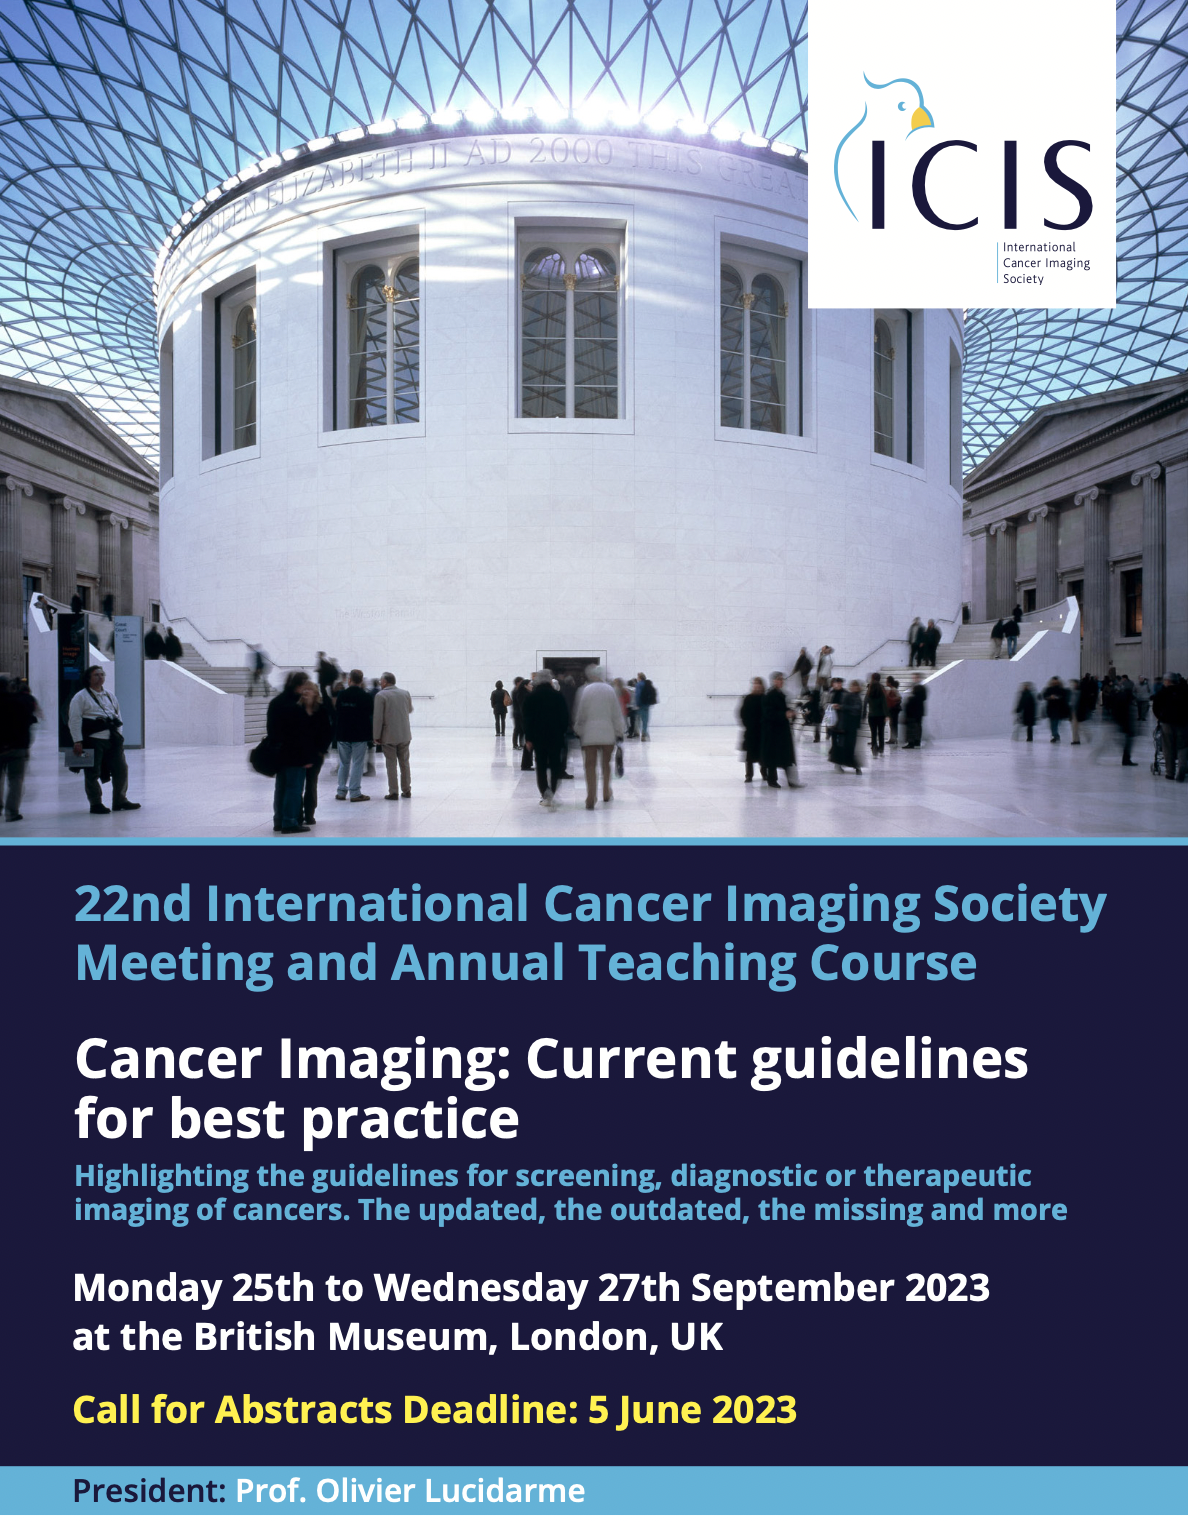 22nd International Cancer Imaging Society Meeting and Annual Teaching Course